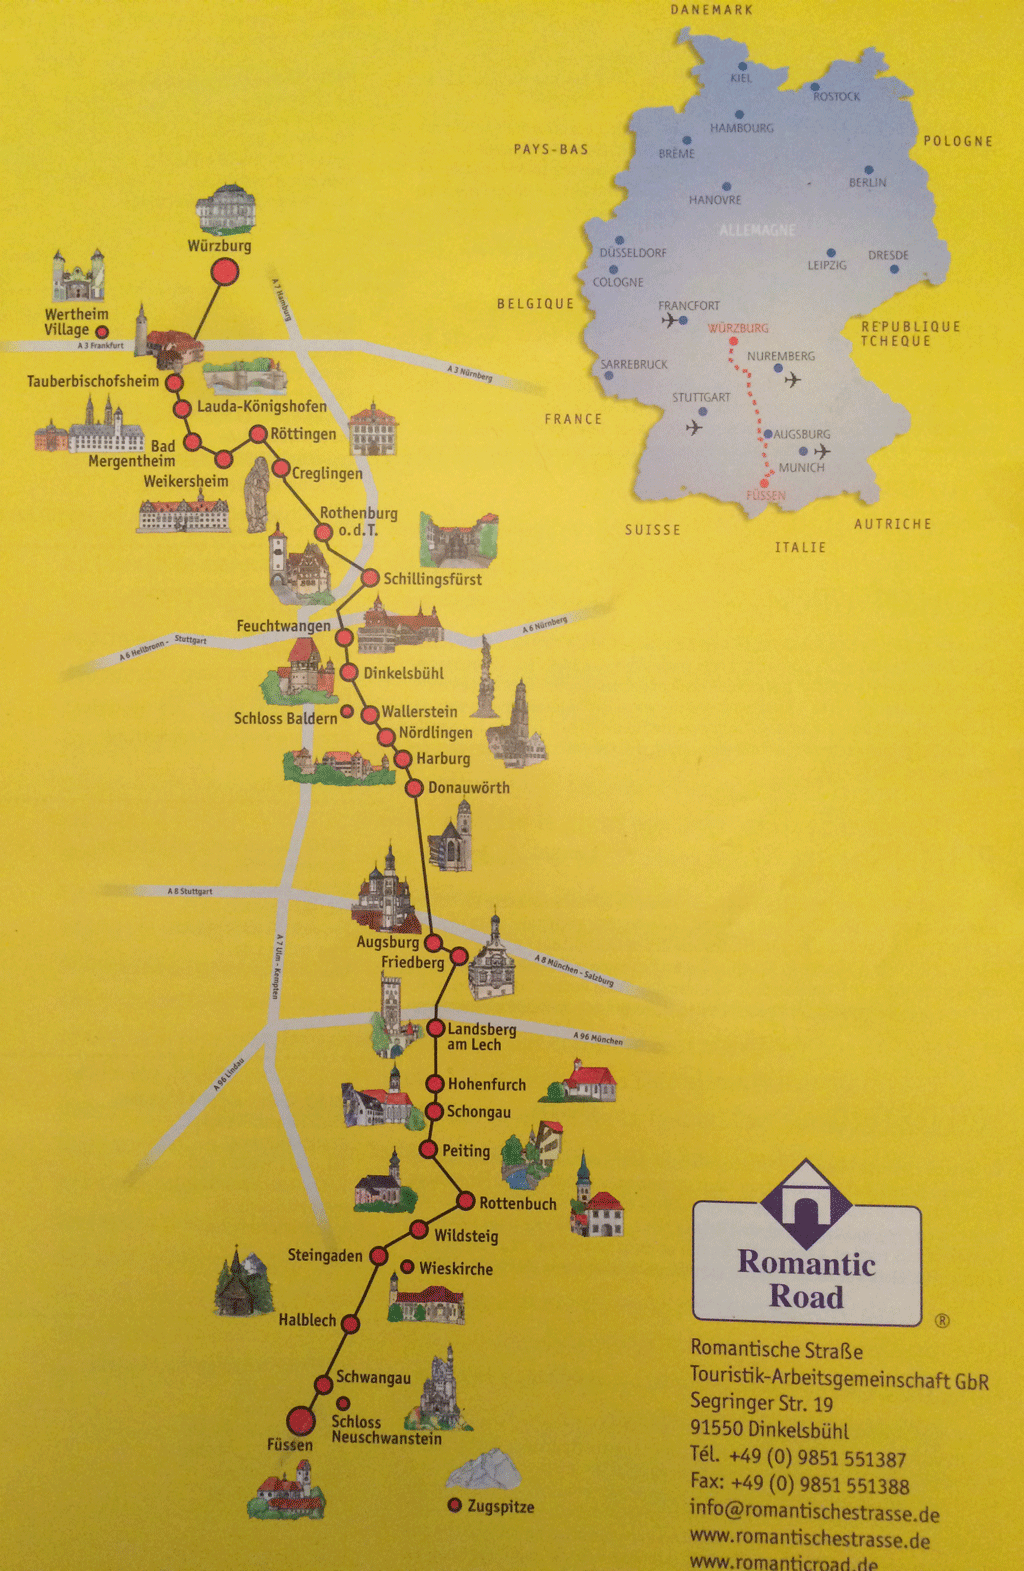 The Romantic Road Map on the tourist brochure